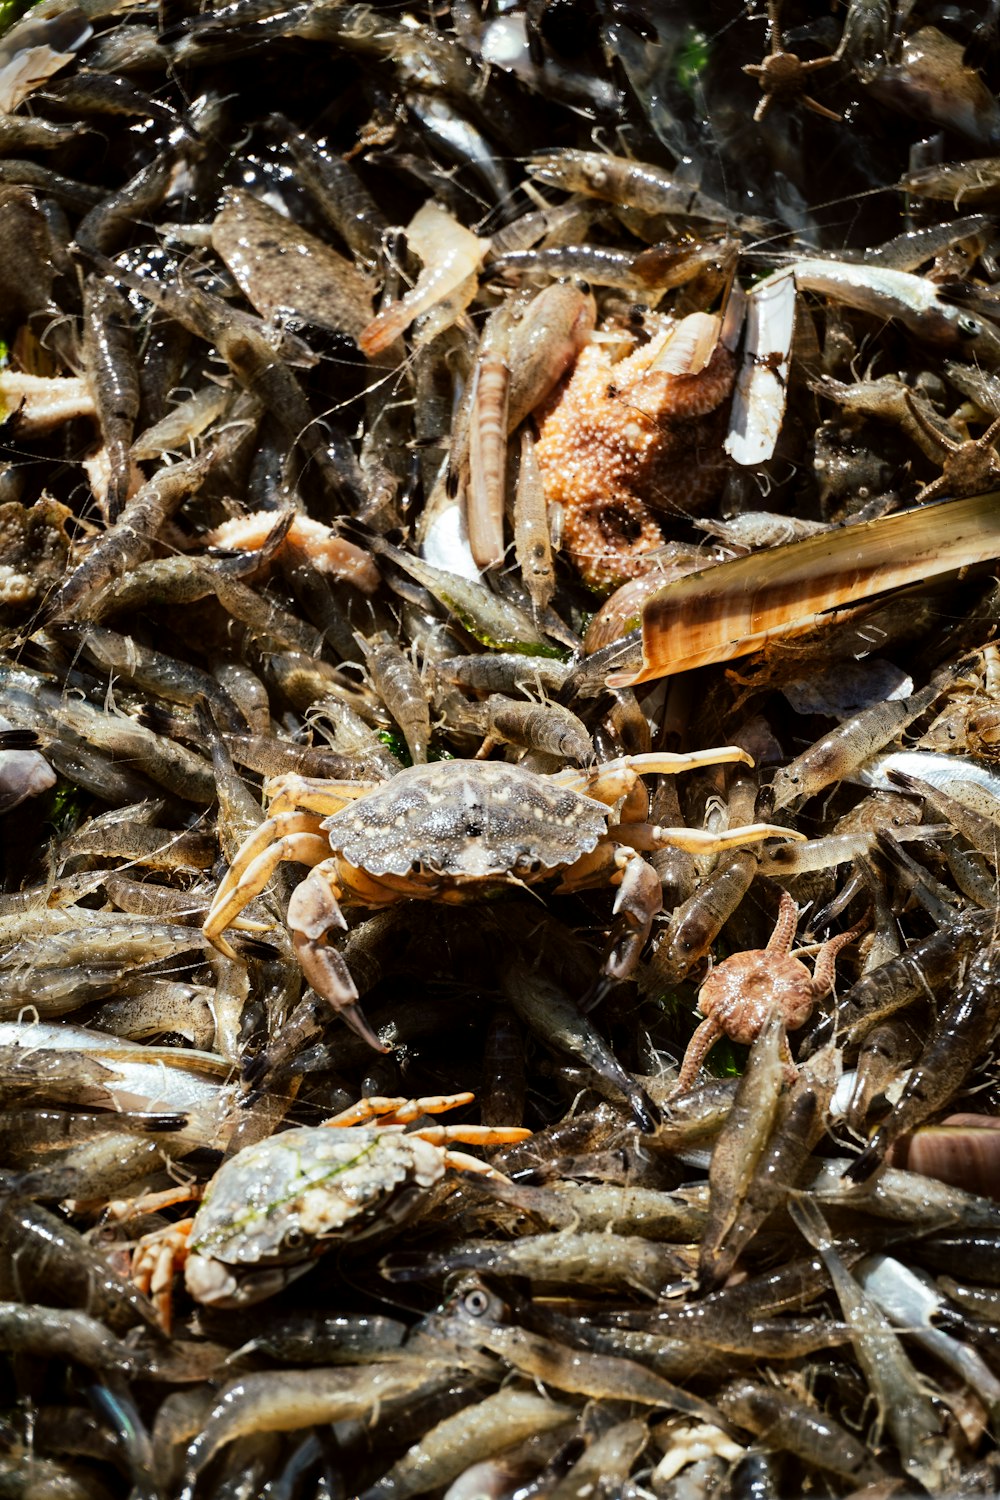 a pile of dead crabs in the water